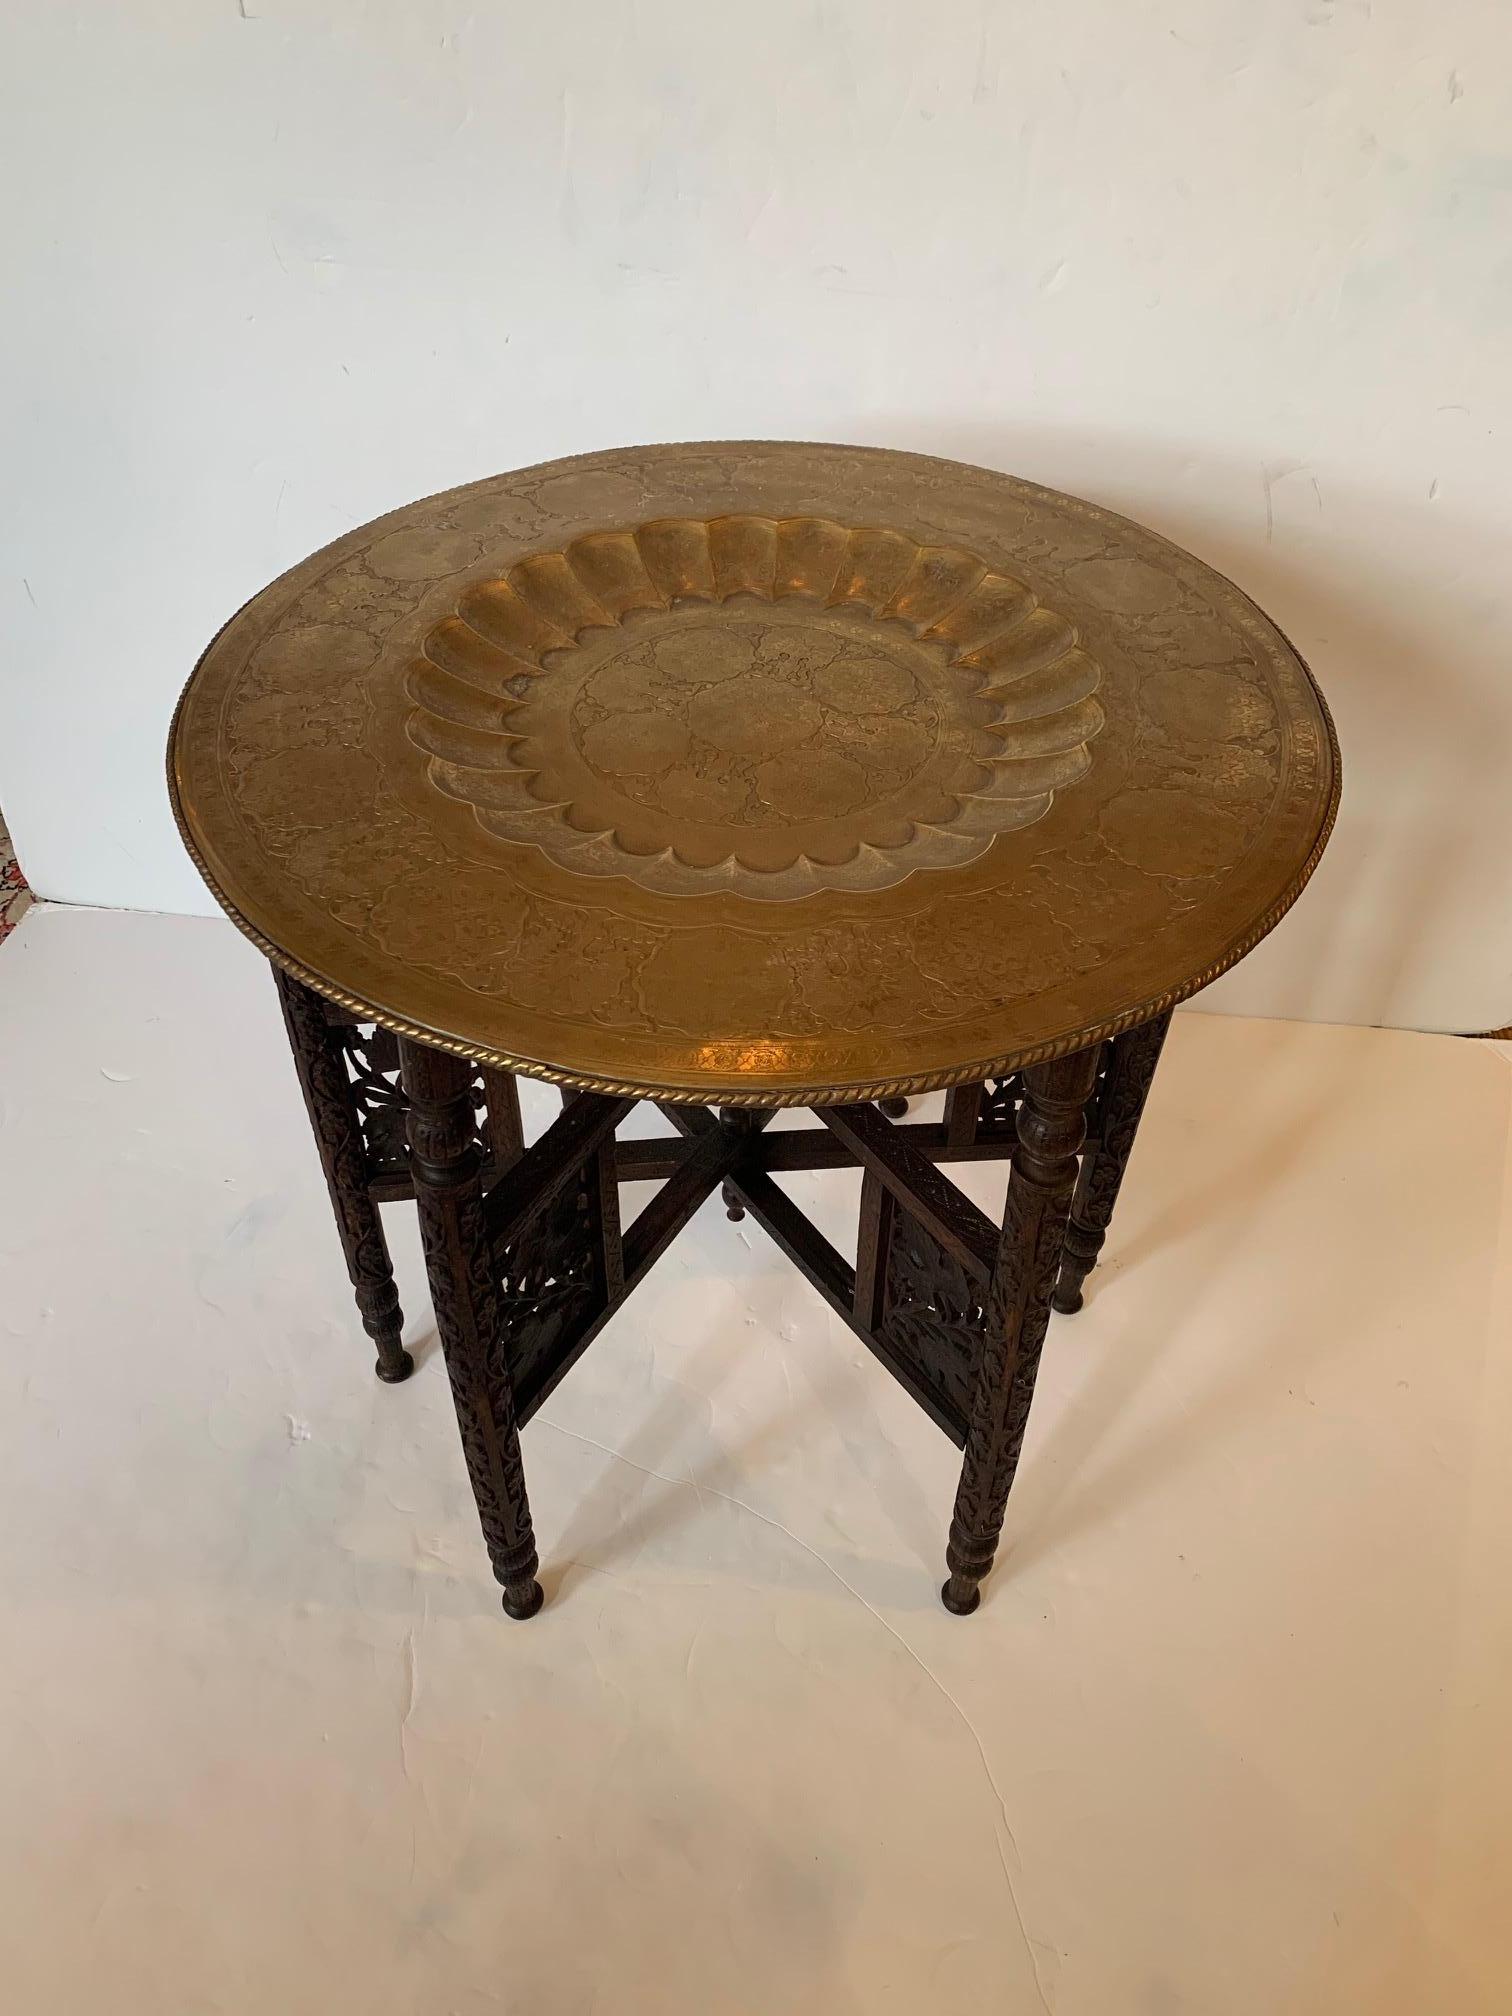 Exotic Moroccan tray top end table having beautiful etched brass tray with central recessed scalloped circle and folding intricately carved base. Brass has nice aged patina and matte finish.